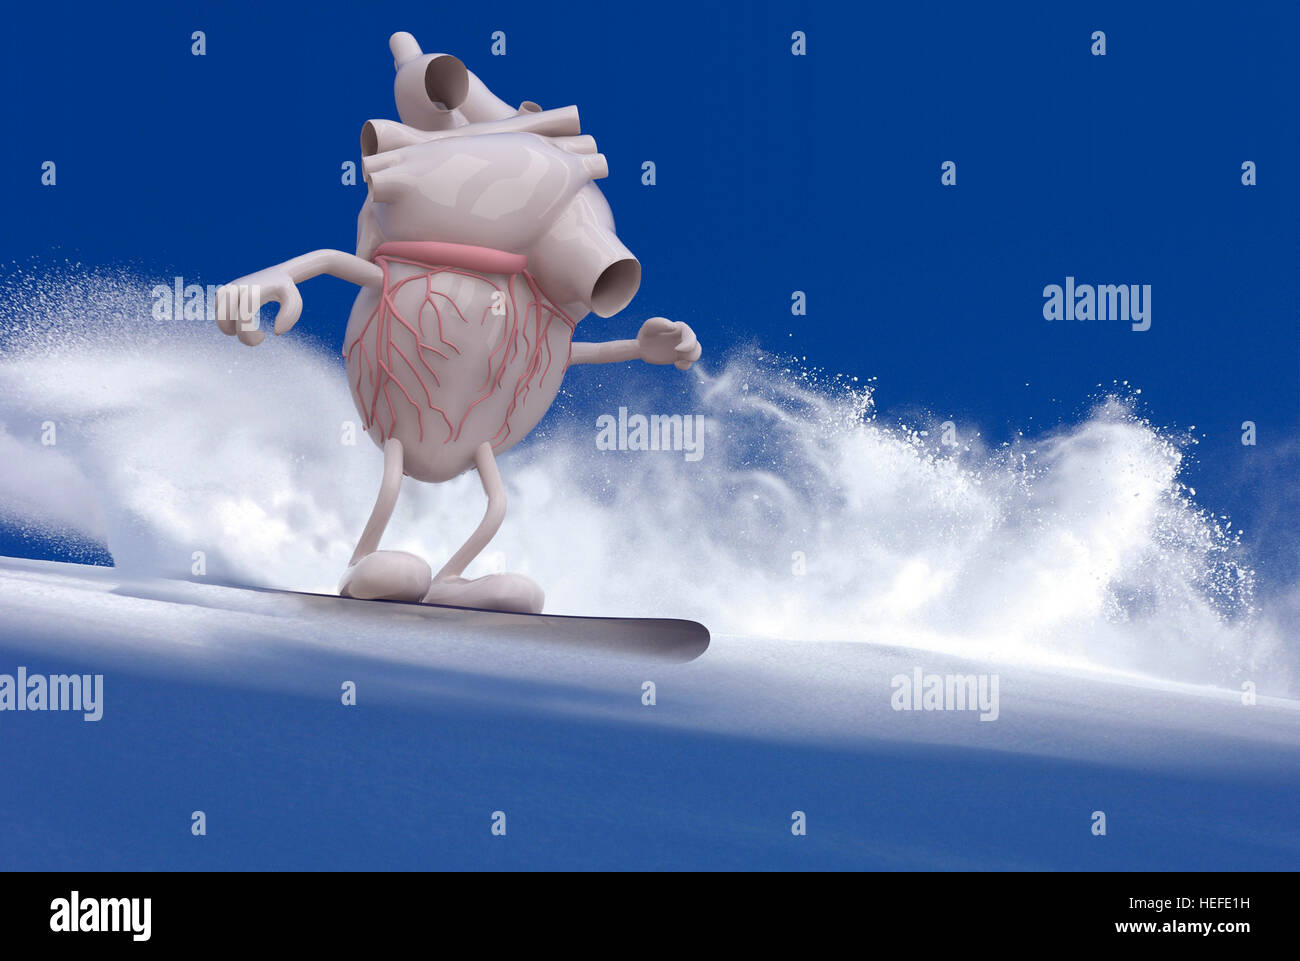 human heart organ with arms and legs snowboarder, 3d illustration Stock Photo